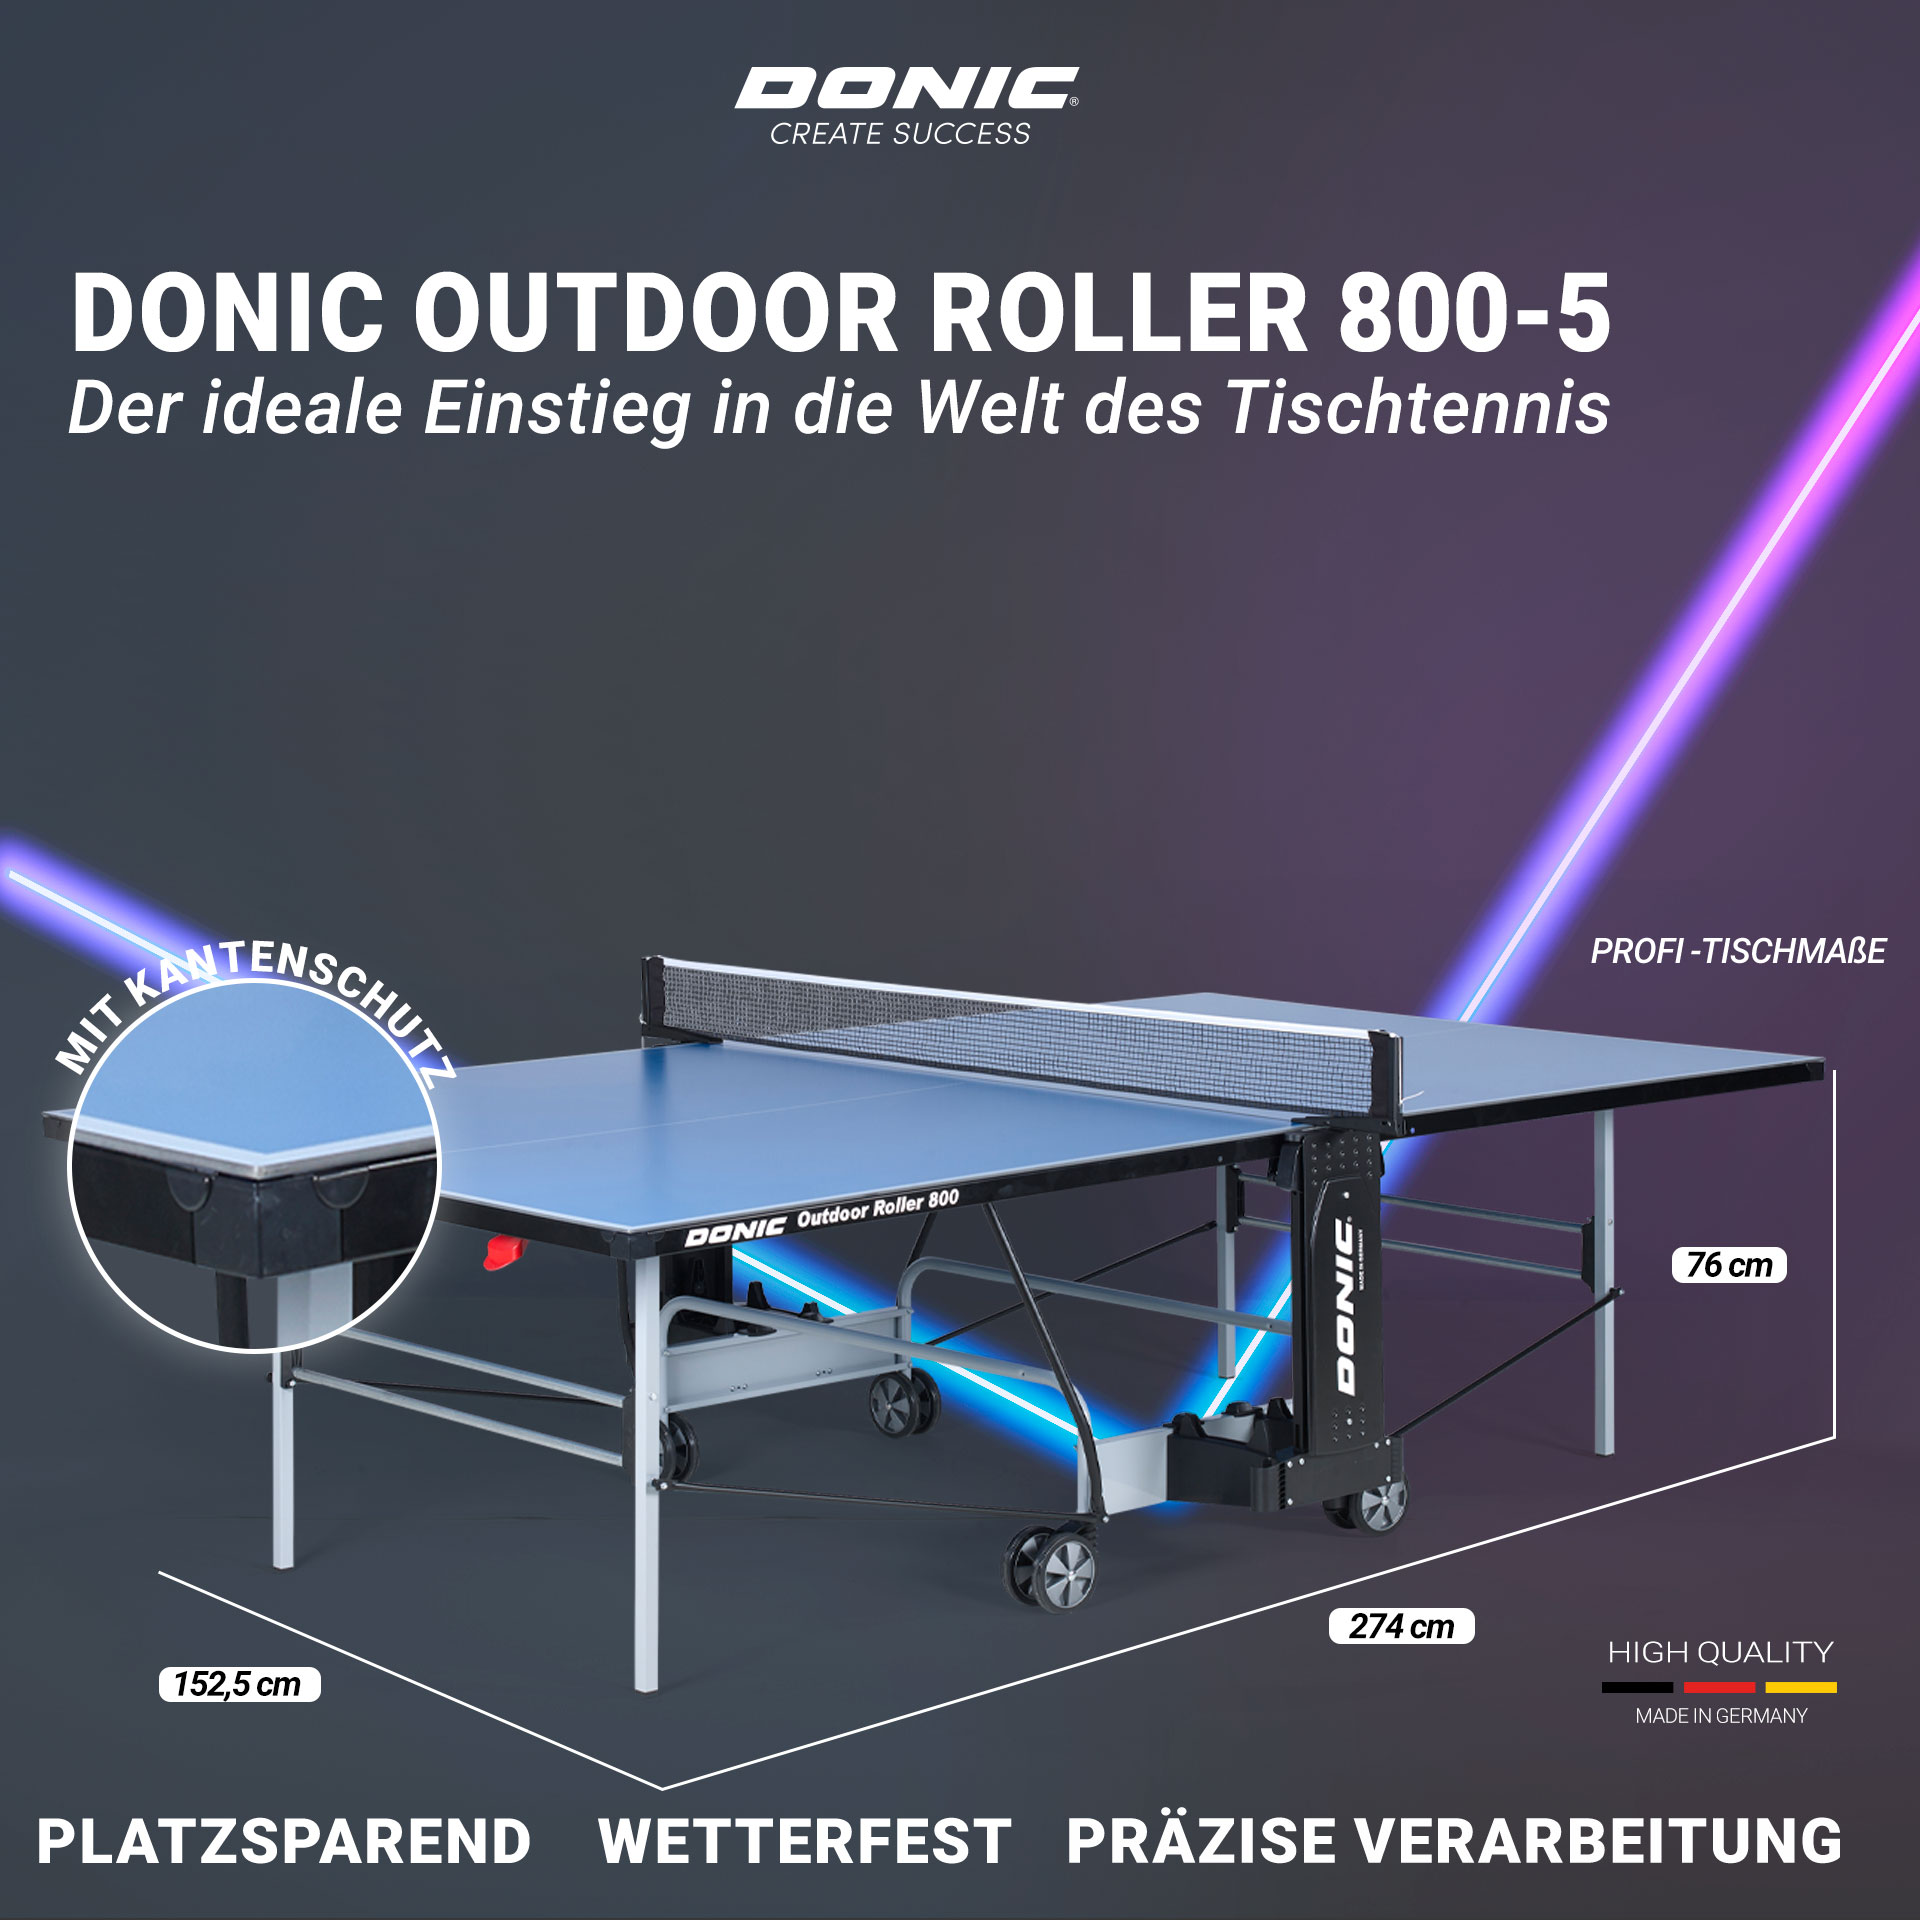 Donic Outdoor Roller 800 -5 | CREATE SUCCESS